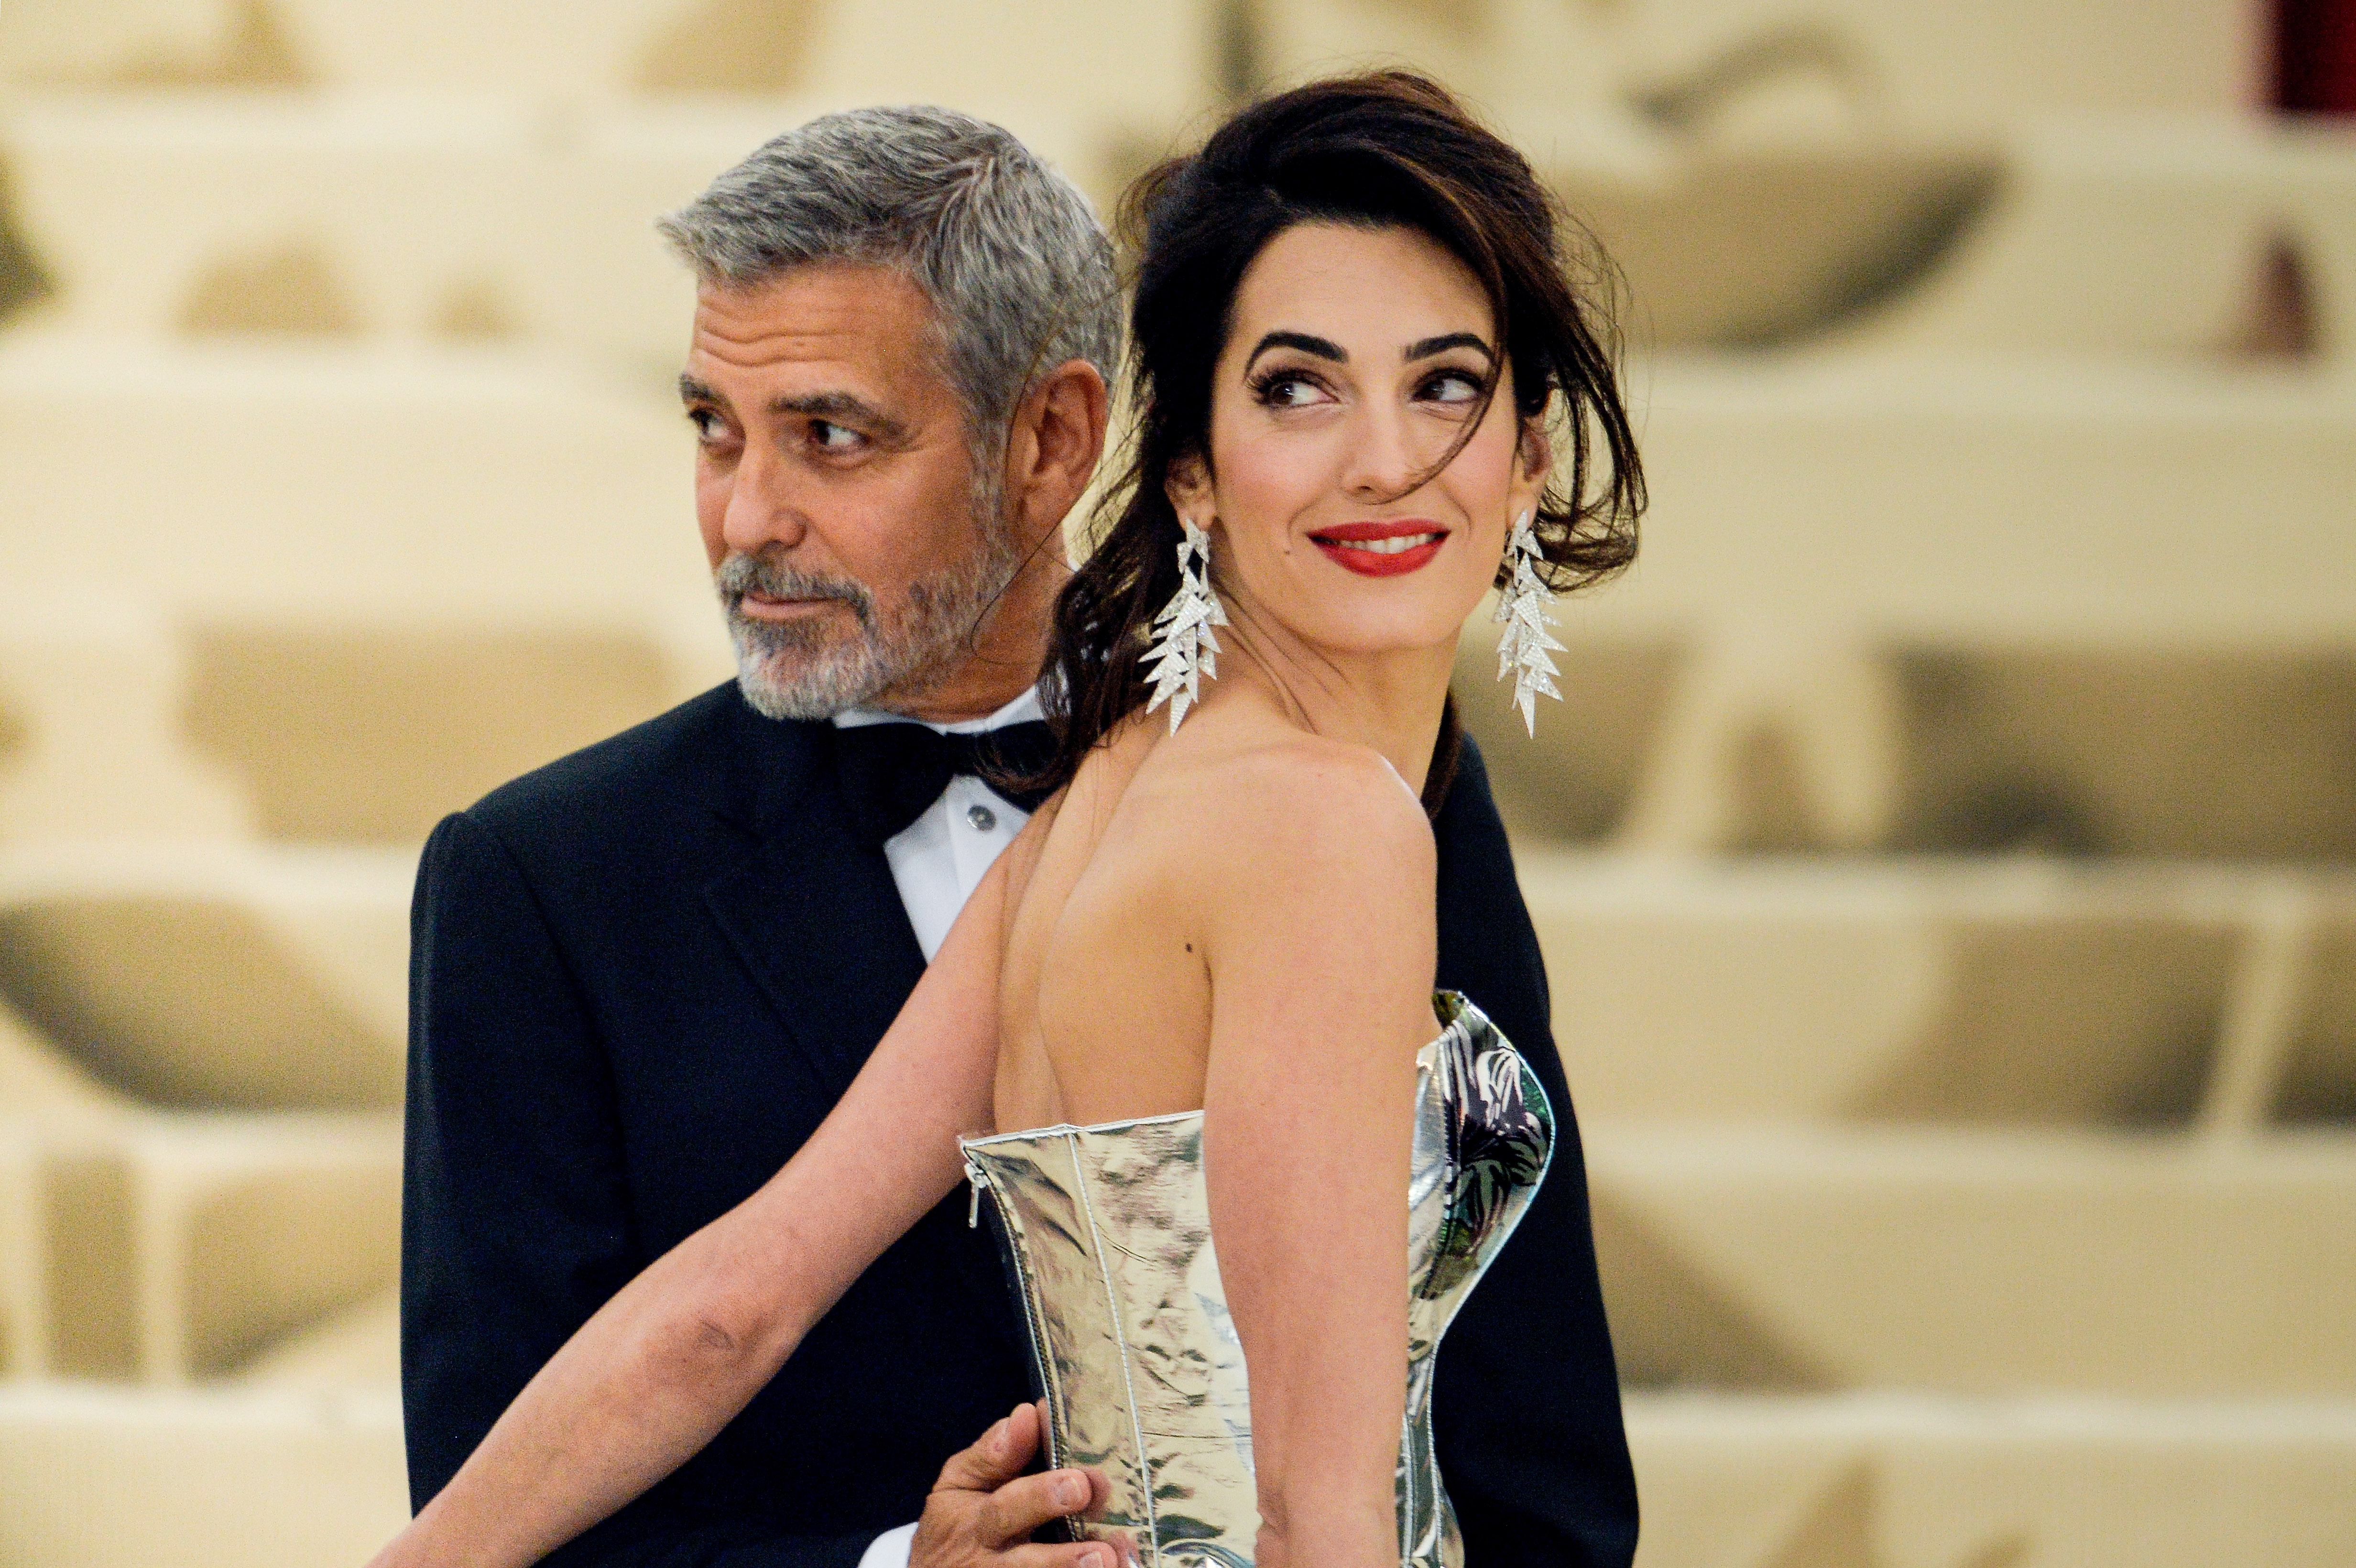 George Clooney and Amal Clooney on May 07, 2018 in New York City. | Source: Getty Images